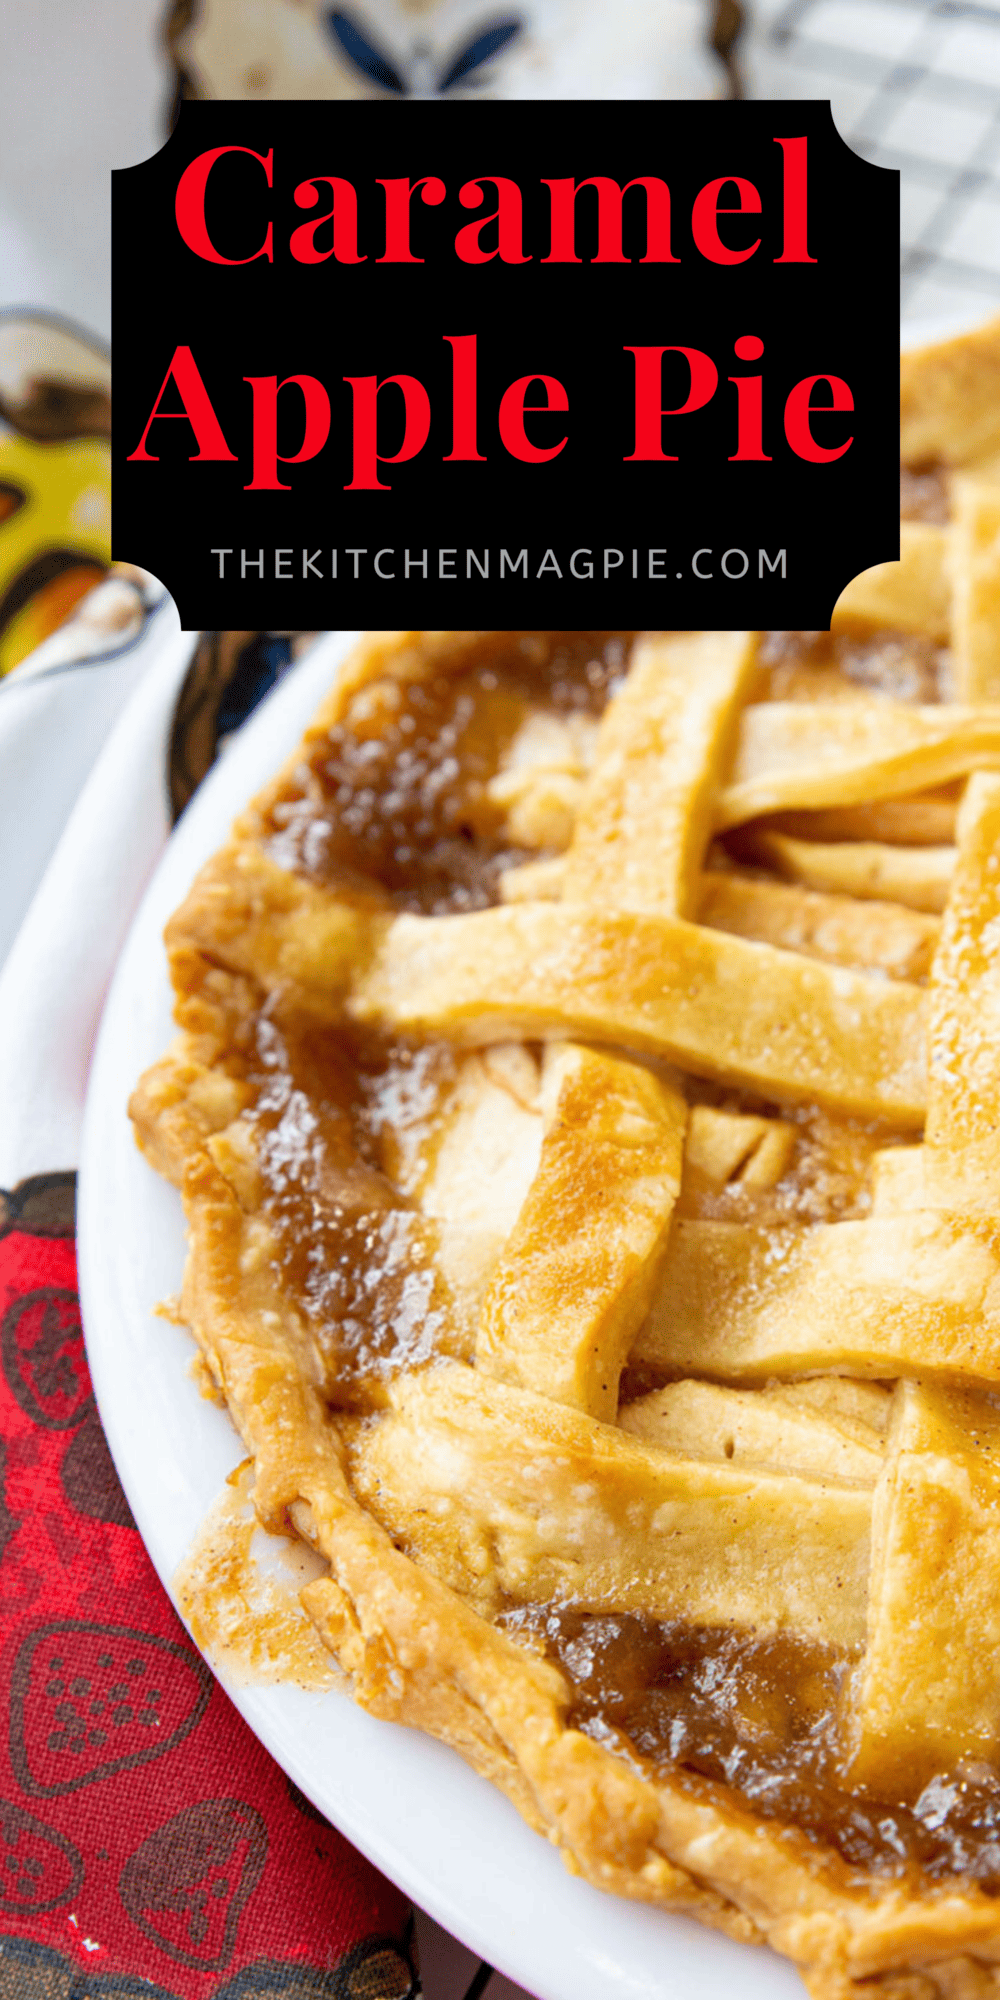 This is one of the easiest yet most delicious apple pie recipes! Caramel sauce is poured over the lattice topped pie then baked to a crispy caramel apple perfection!